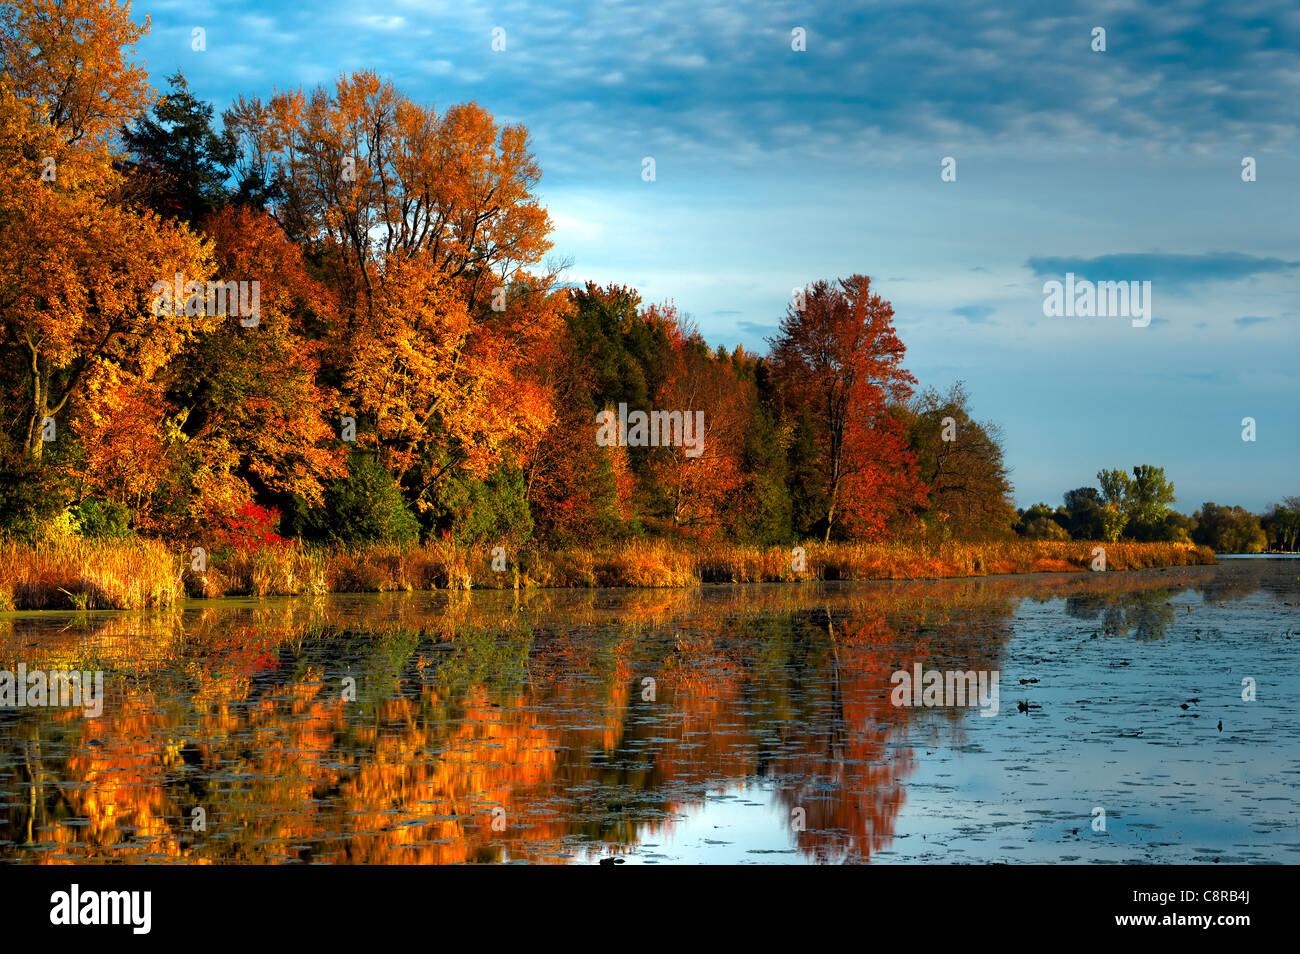 An HDR landscape of a forest in beautiful fall colors reflected in the still waters of a calm river in Ontario, Canada. Stock Photo